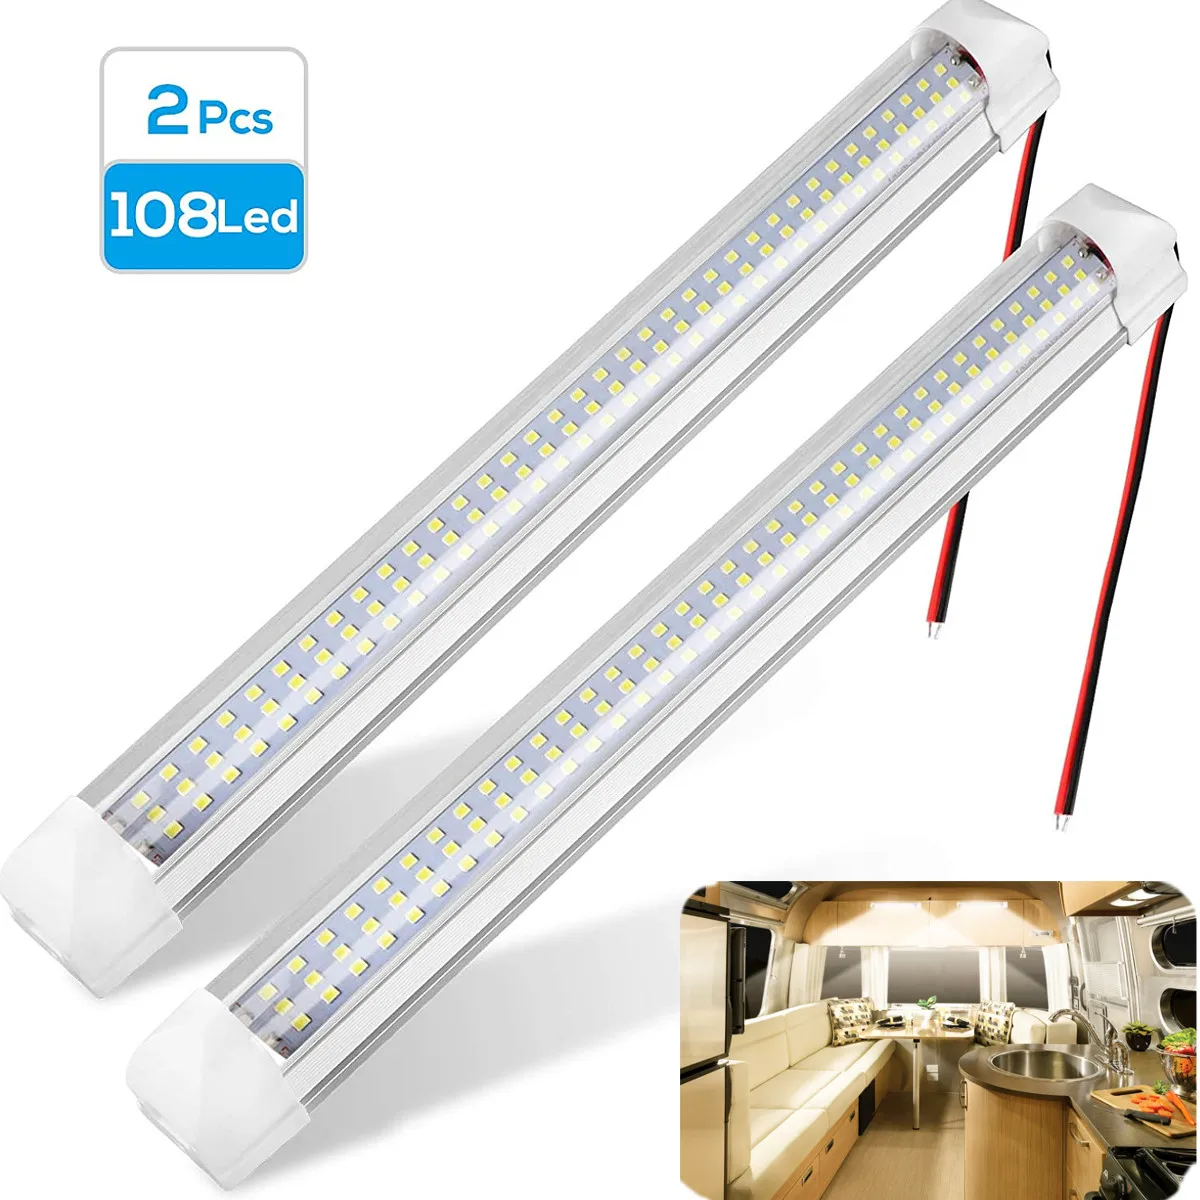 

1PC/2PCS 12V 108 Universal LED Interior Light Bar Strip with ON/OFF Switch or RV Van Truck Lorry Camper Boat Caravan Motorhome